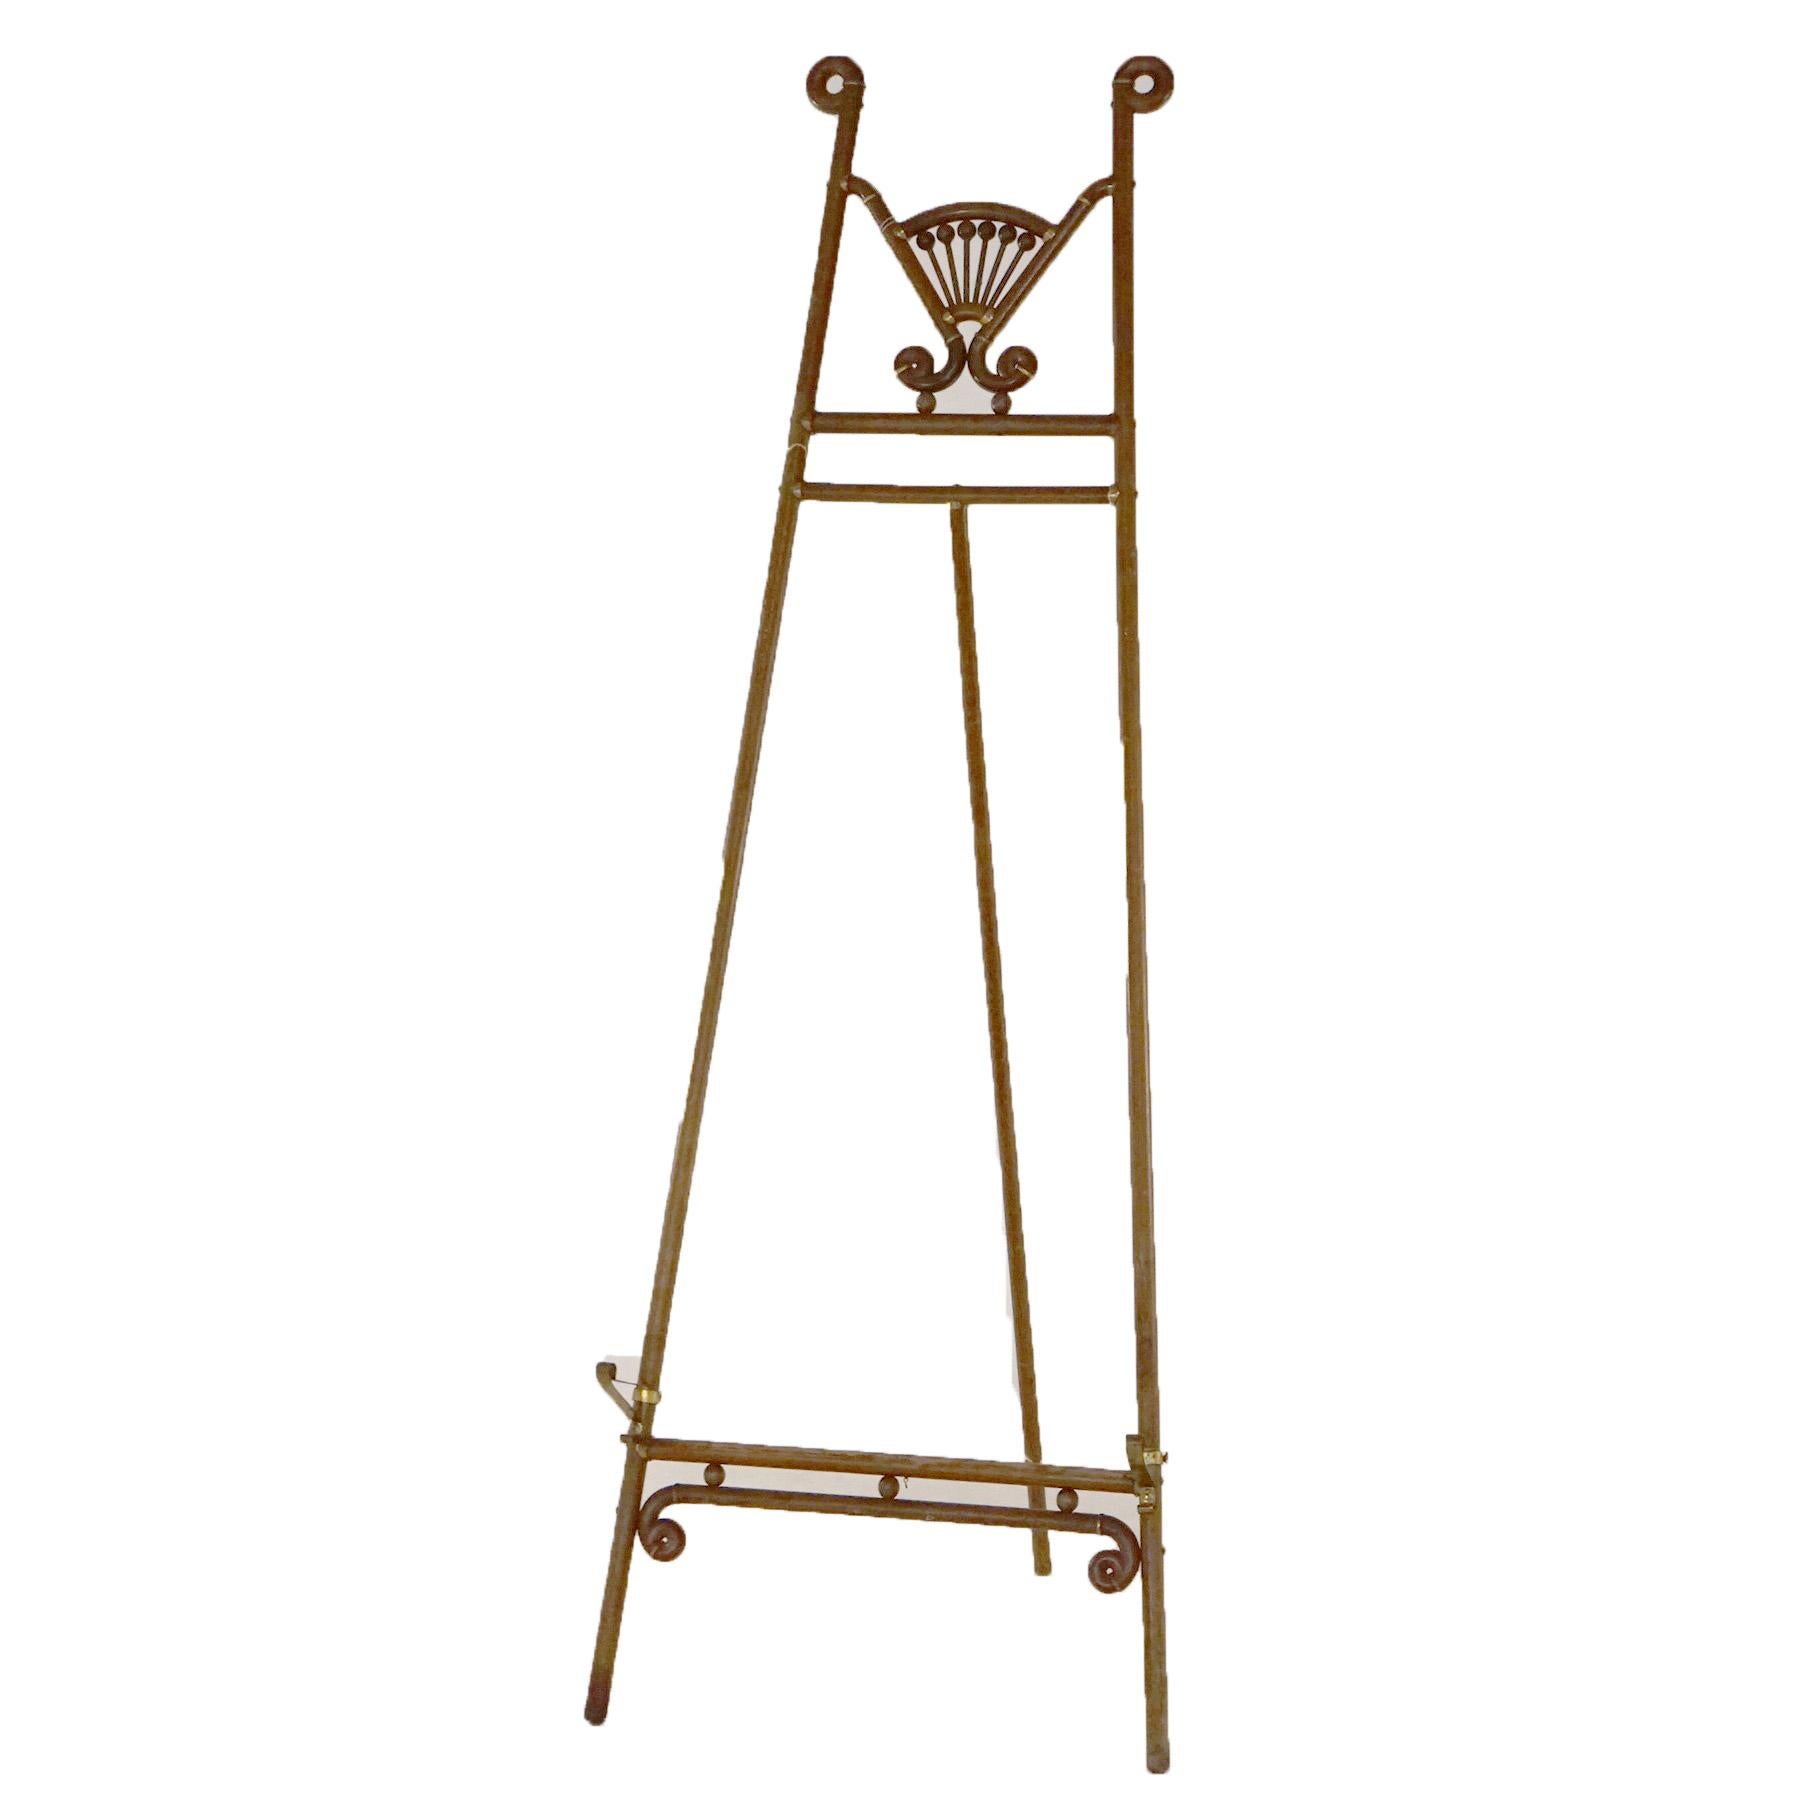 An antique art display easel offers oak construction with stylized fan crest, c1890

Measures - 65